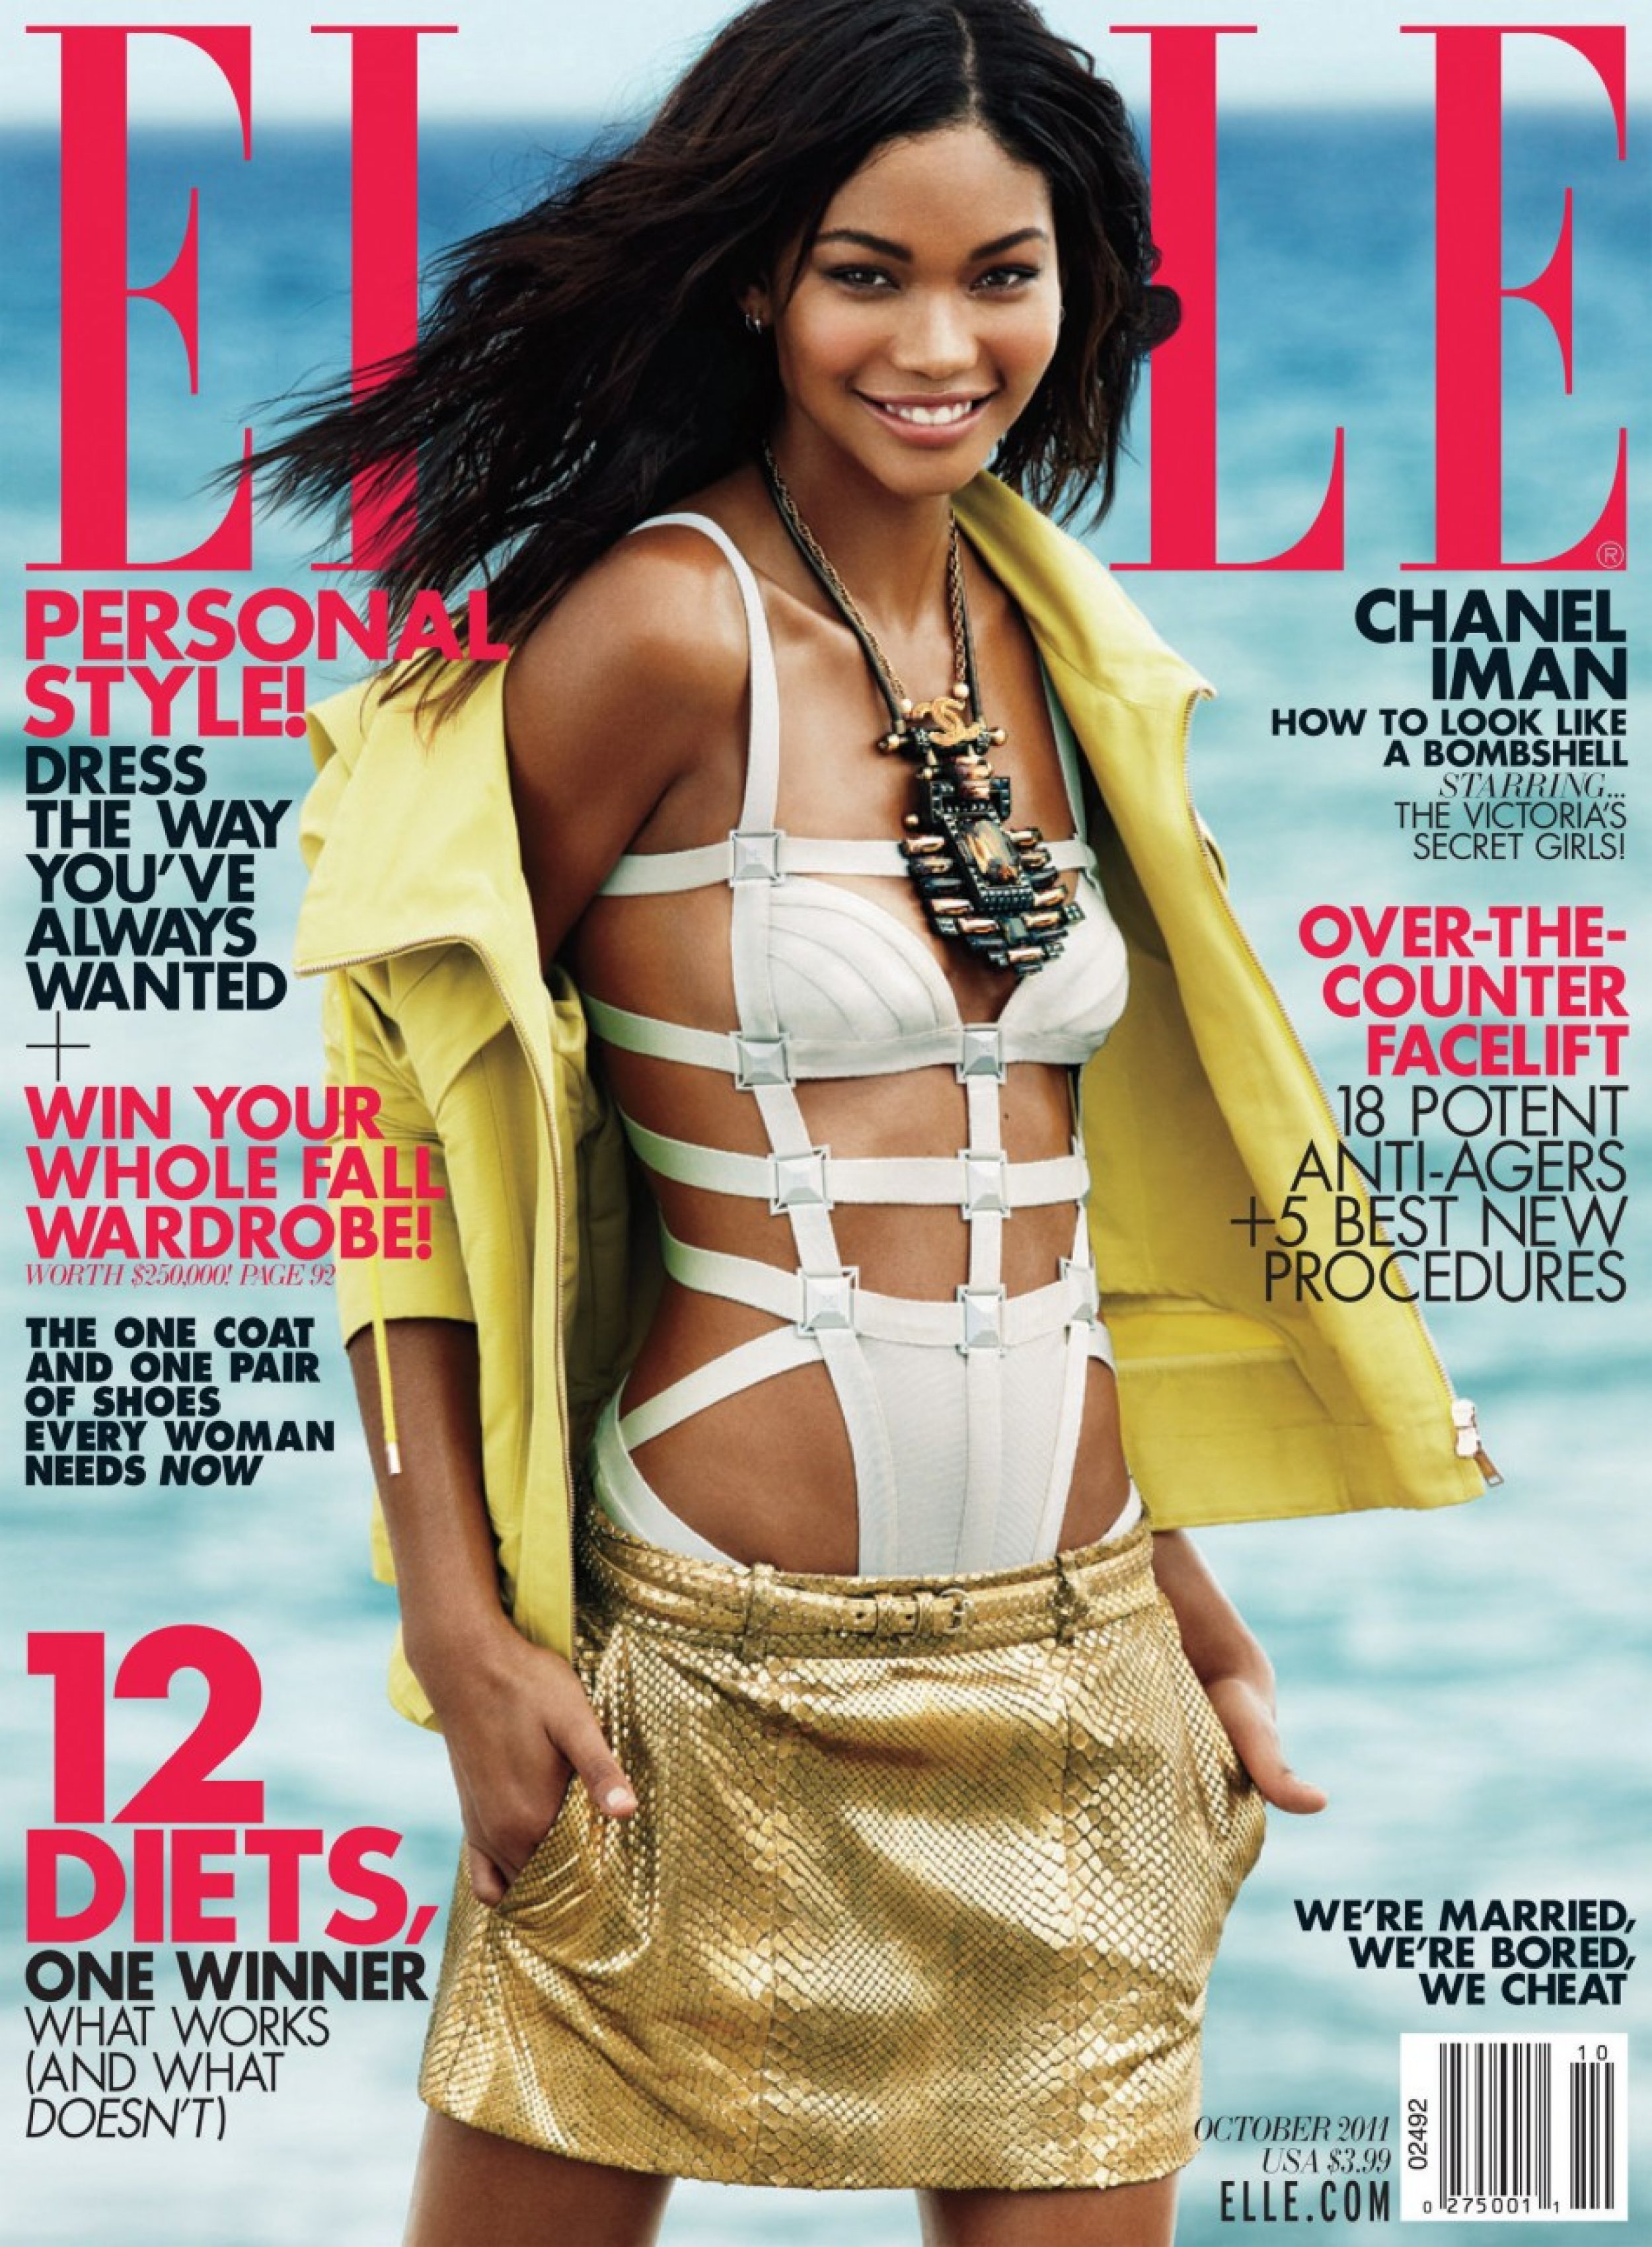 Victorias Secret Bombshell Angels Grace the Cover of Elle039s Latest Issue.